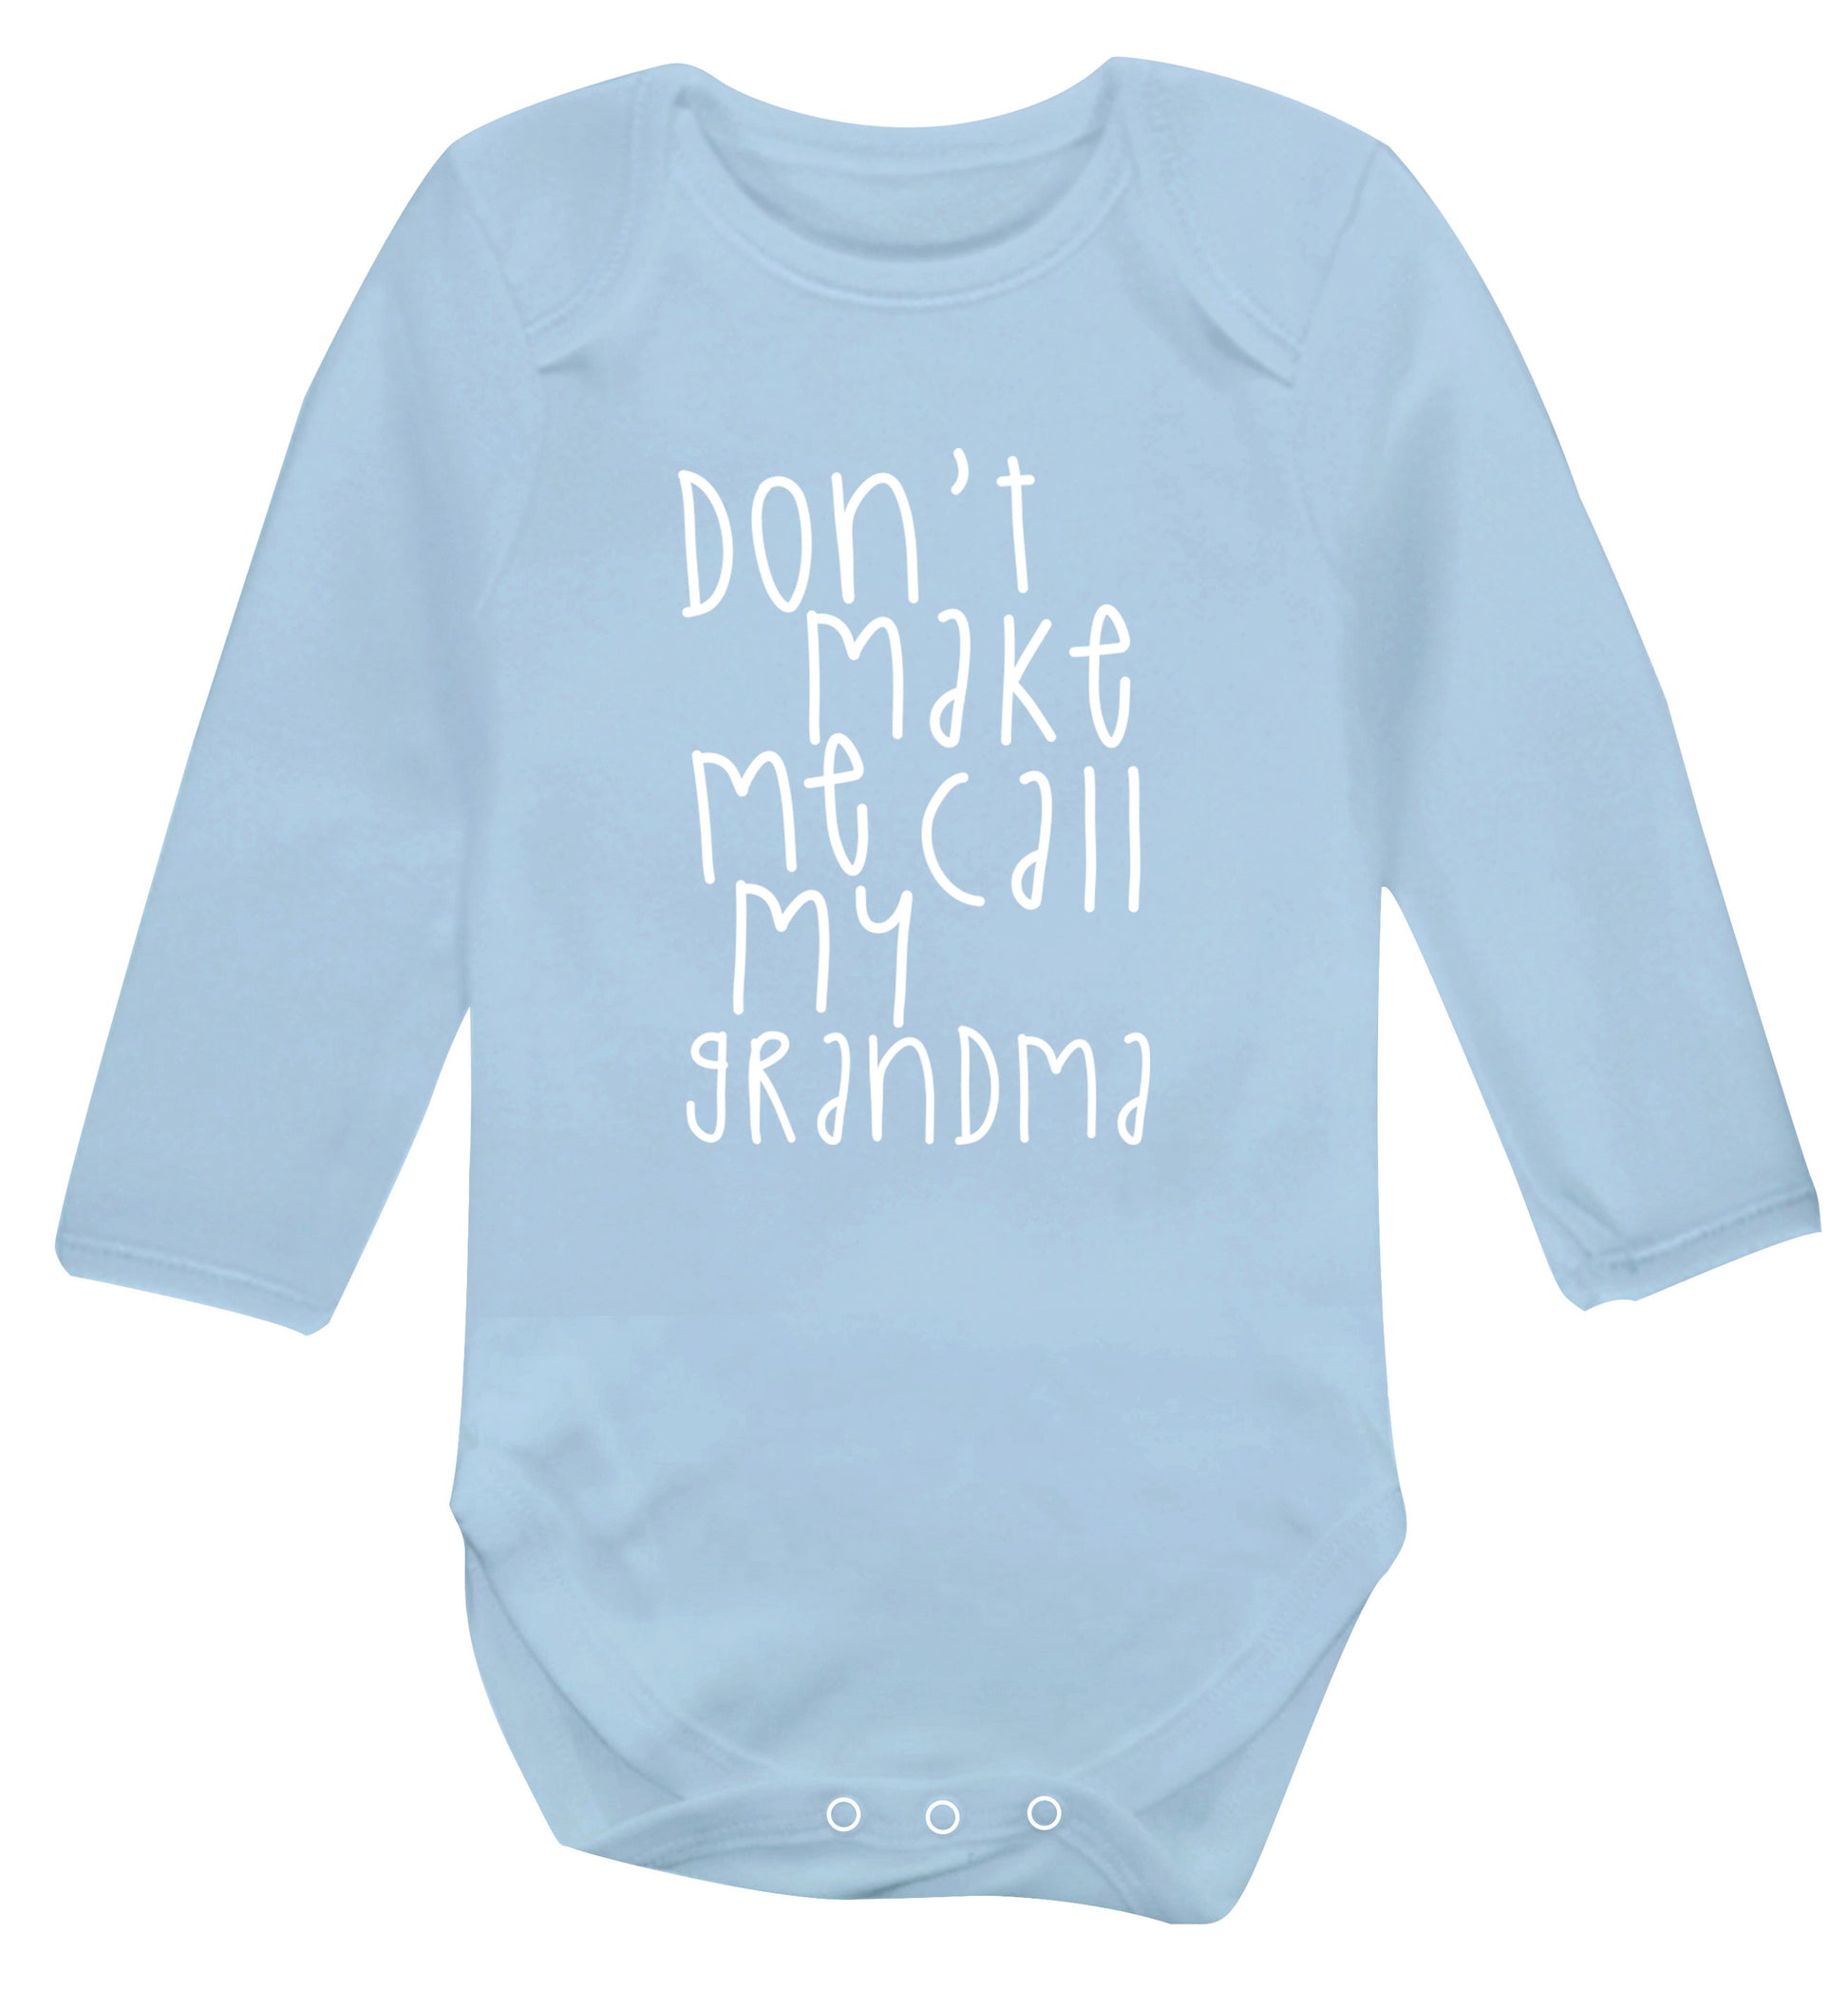 Don't make me call my grandma Baby Vest long sleeved pale blue 6-12 months